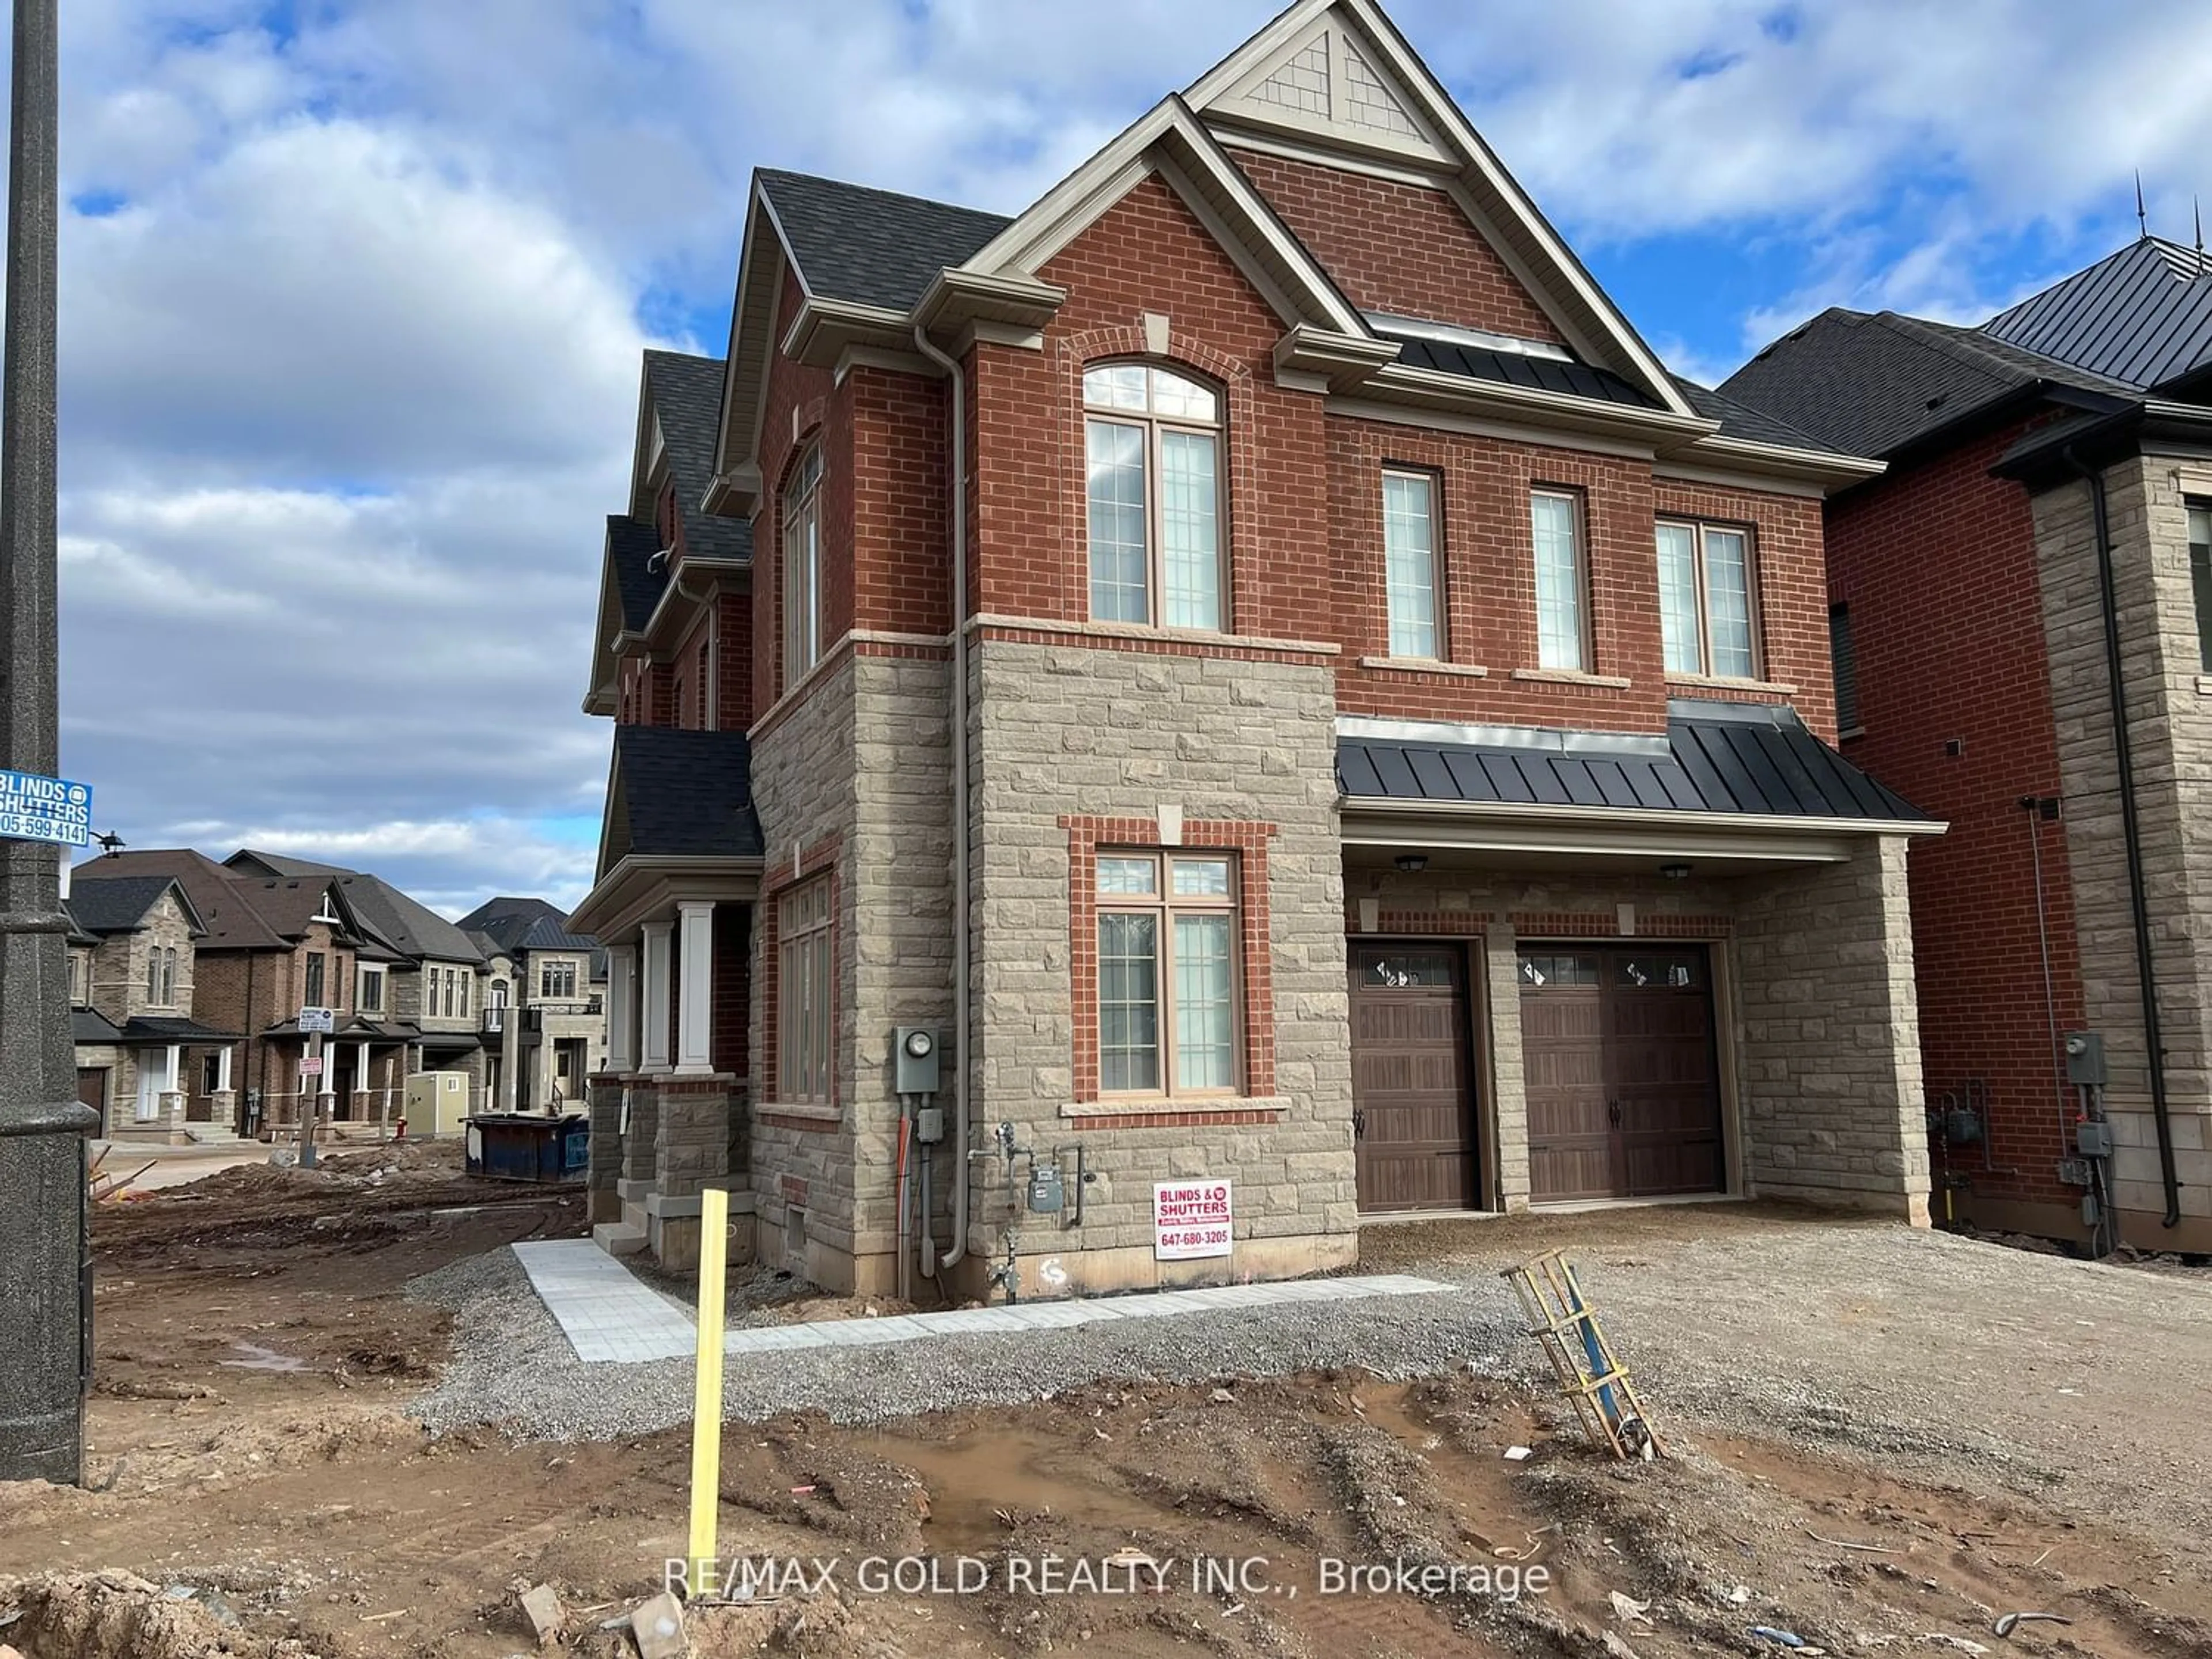 Home with brick exterior material for 71 William Crawley Way, Oakville Ontario L6H 0Y8